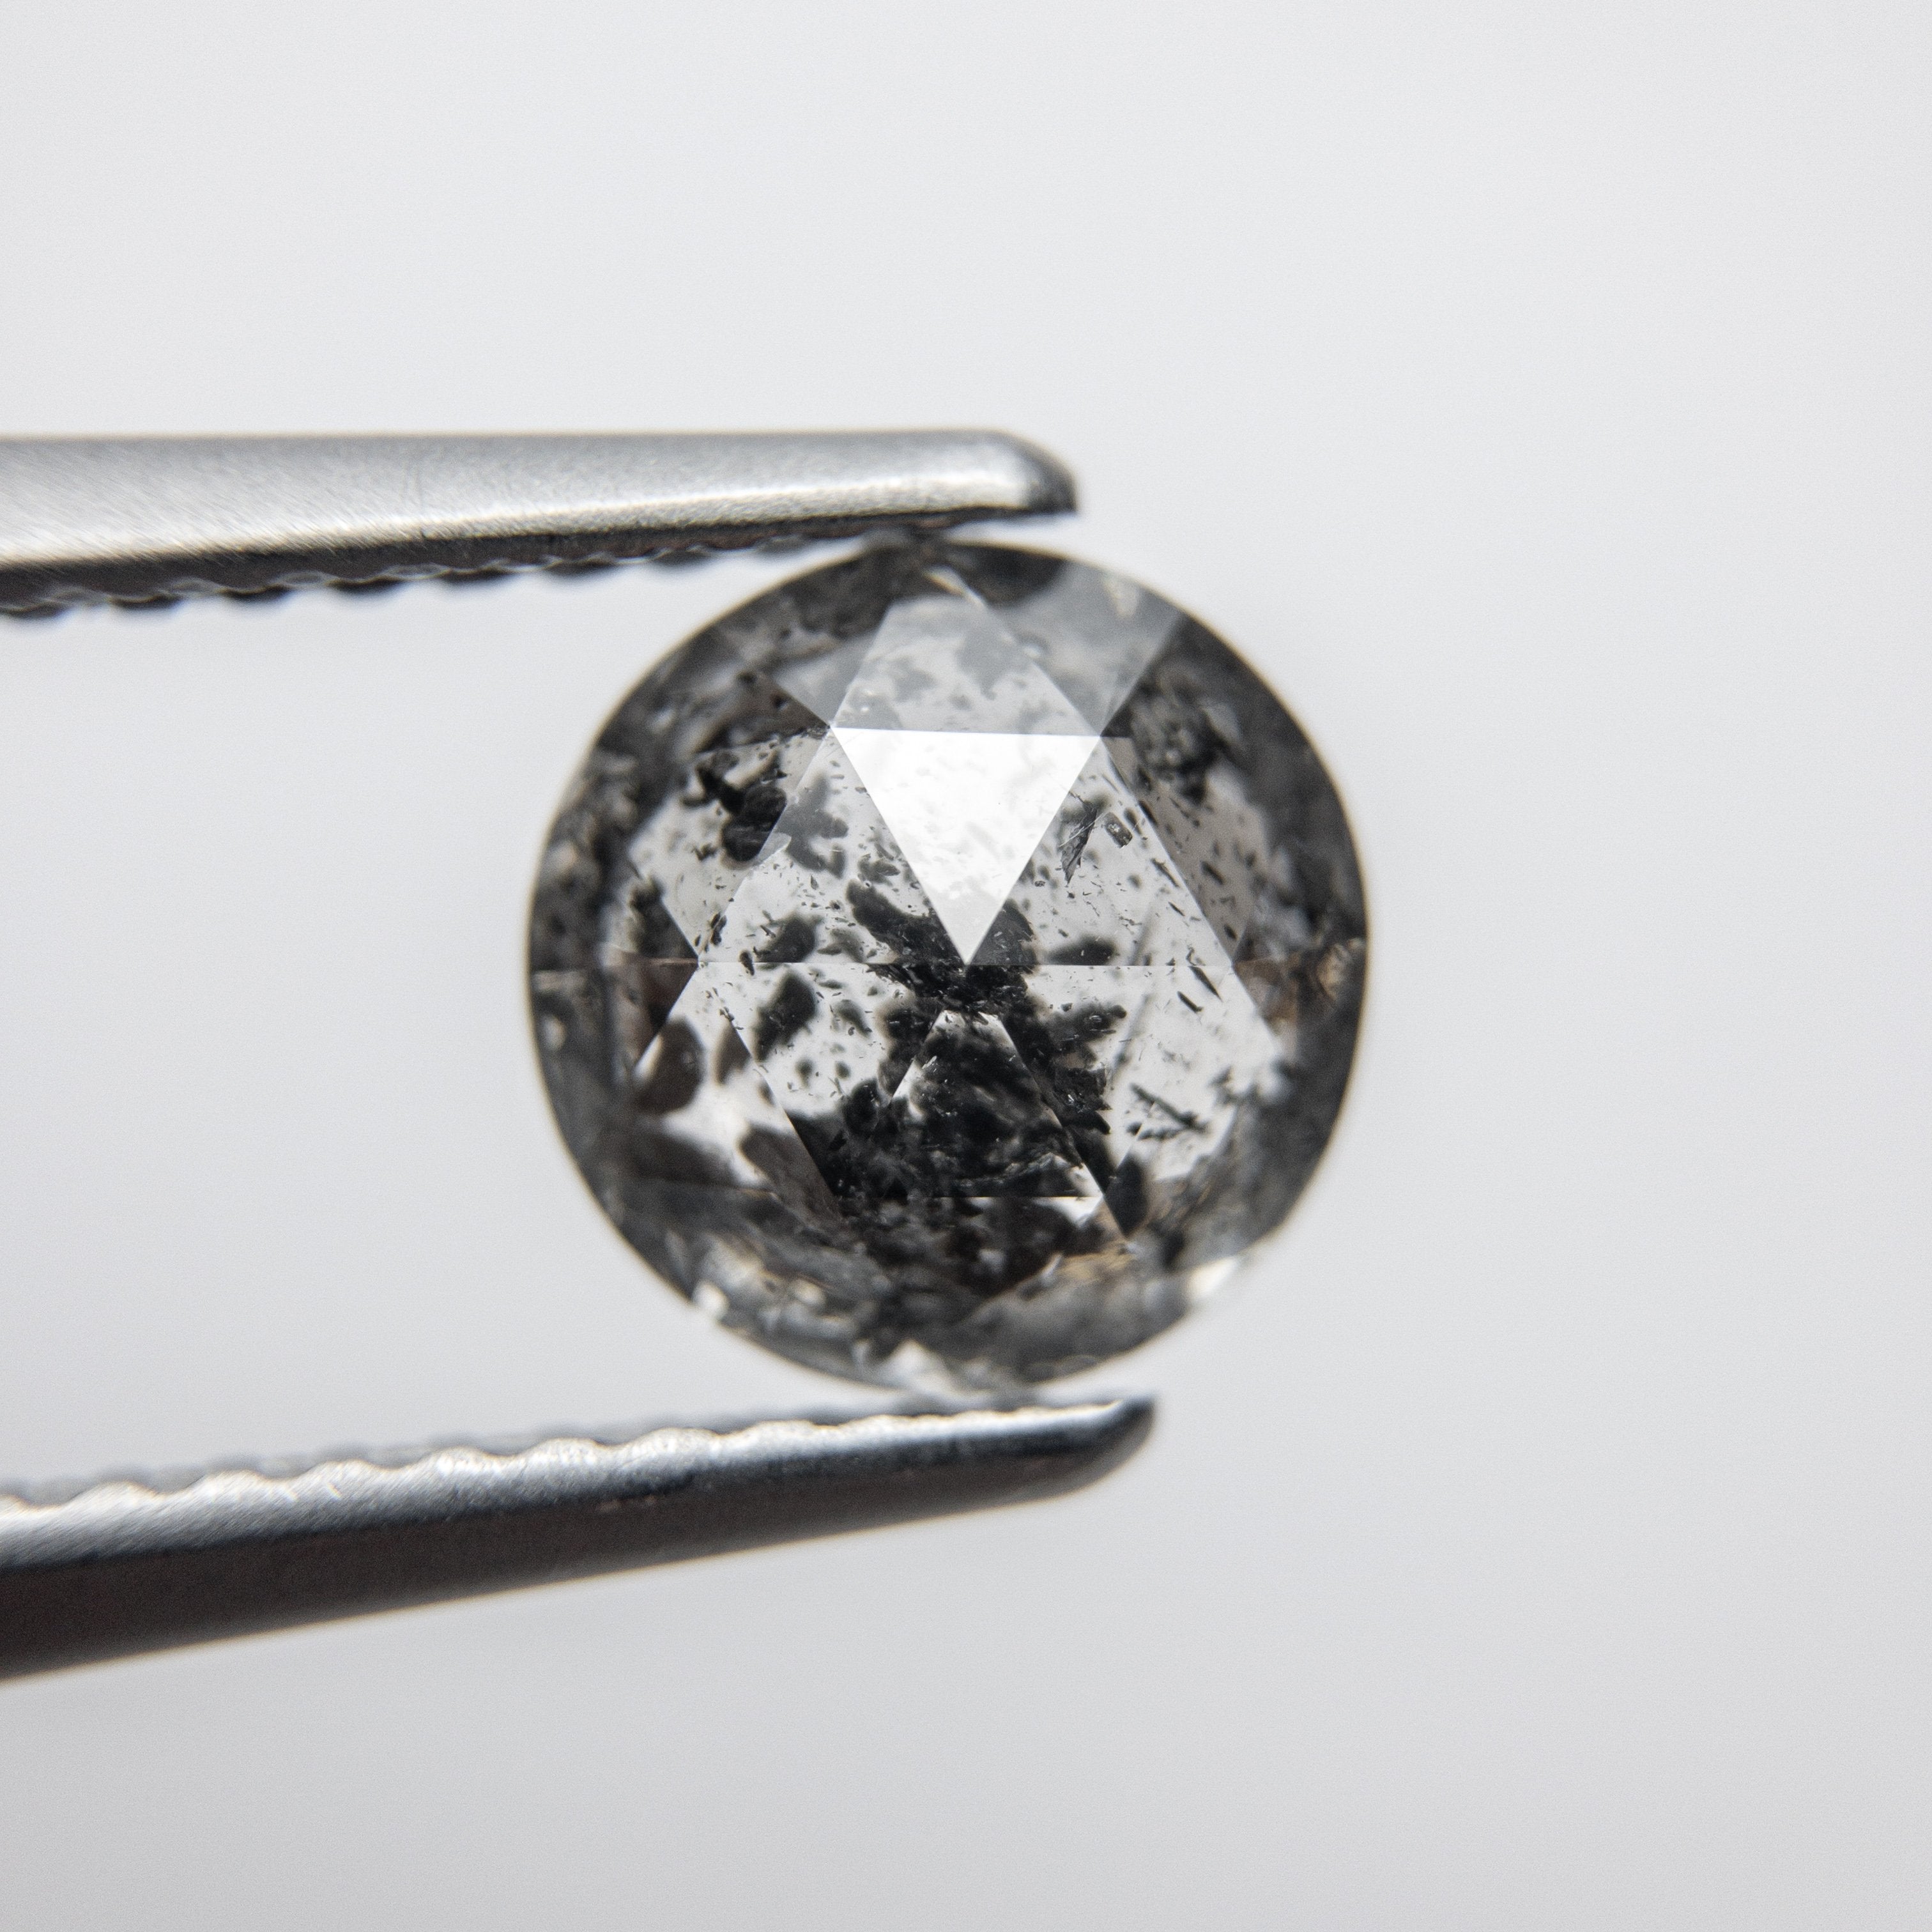 1.54ct 7.31x7.22x3.67mm Round Double Cut 18094-12 HOLD 05.21.20 D703